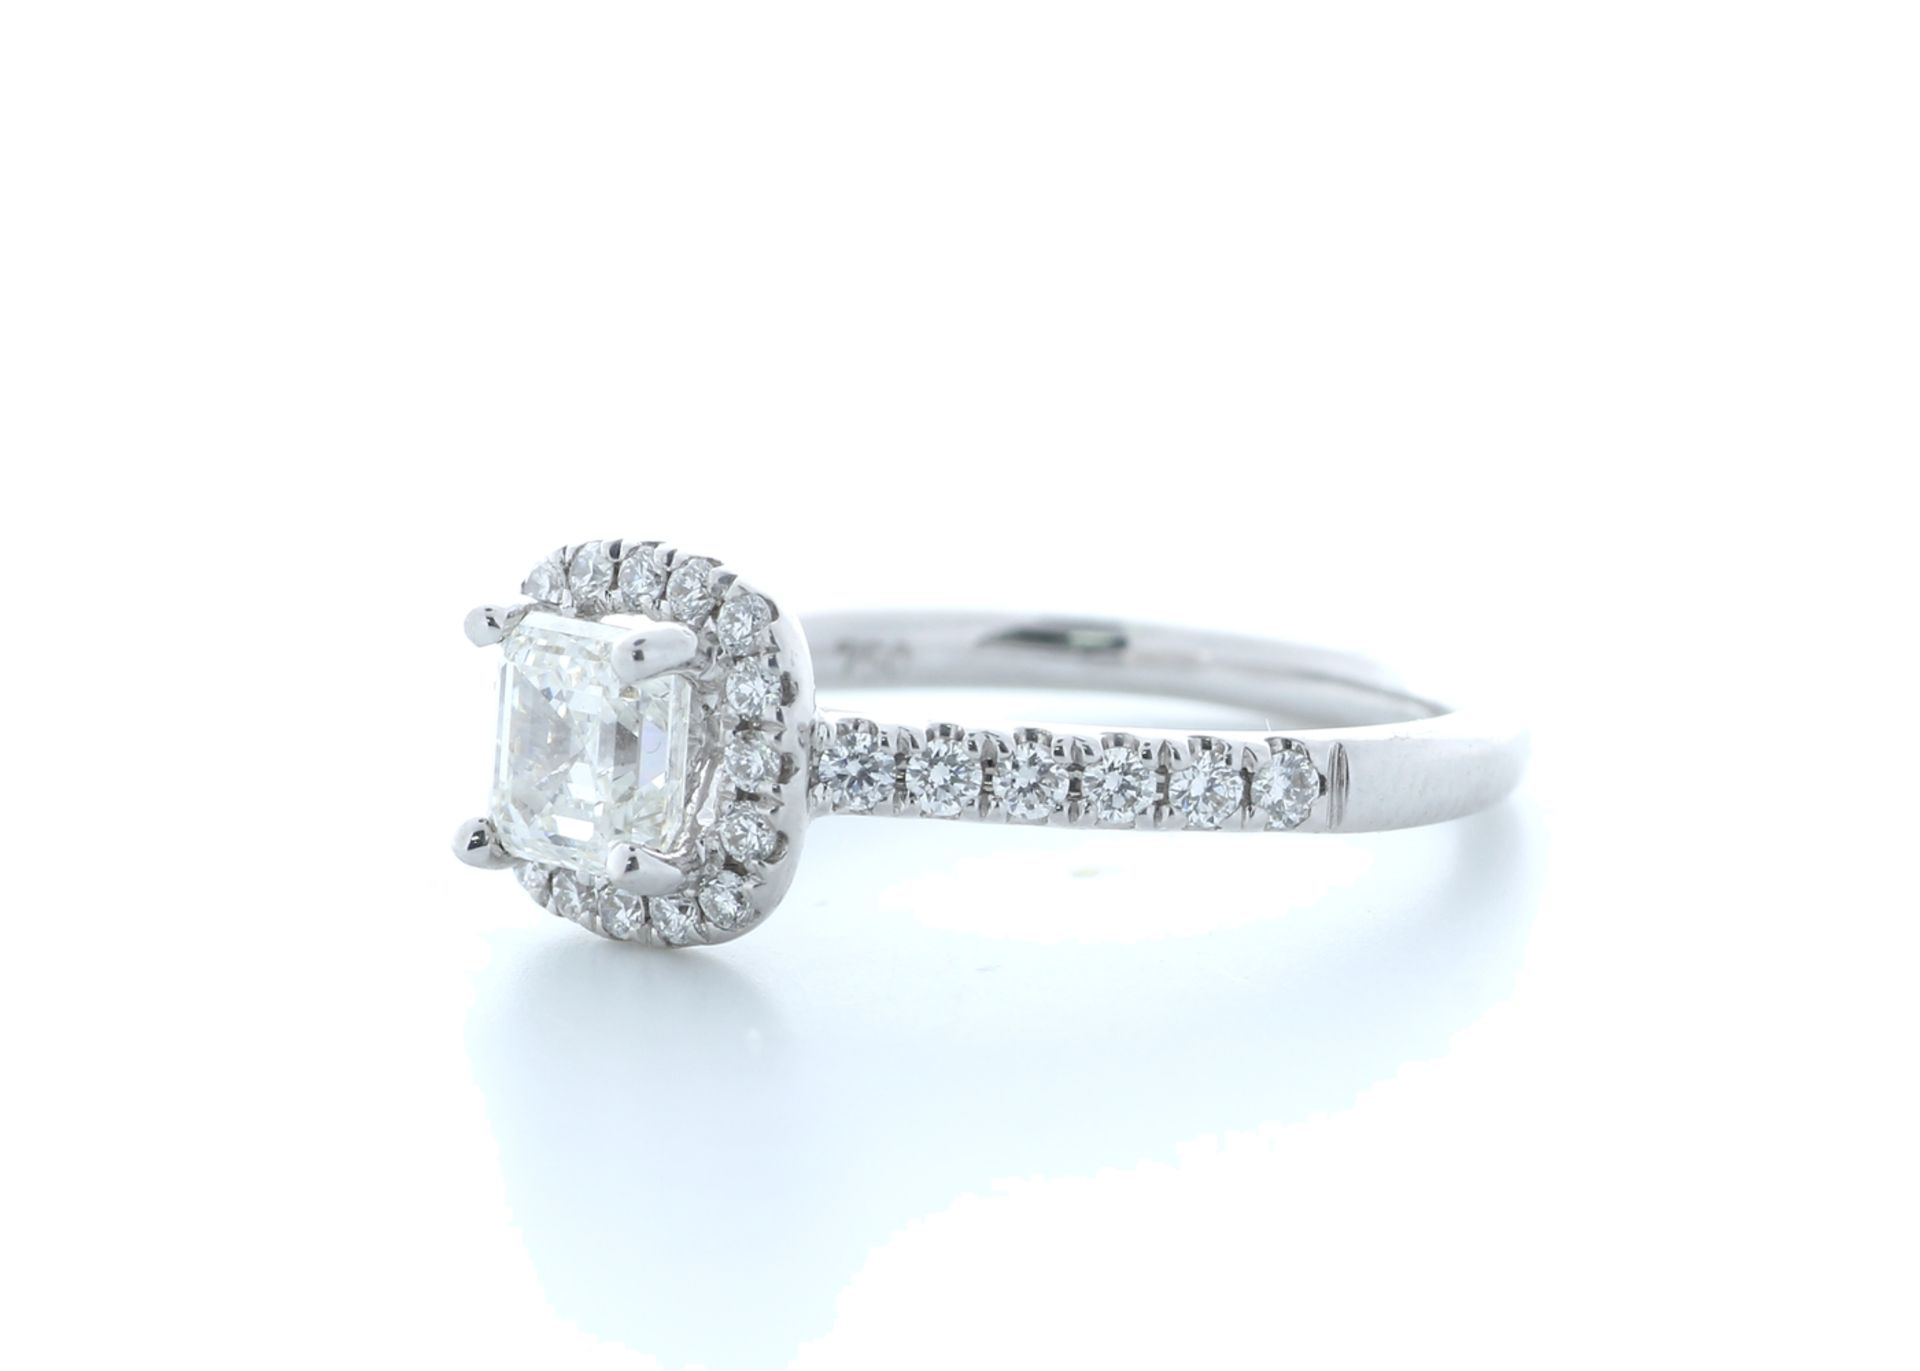 18ct White Gold Flawless Asscher Cut Diamond Ring 1.00 (0.71) Carats - Valued by IDI £18,000.00 - - Image 2 of 5